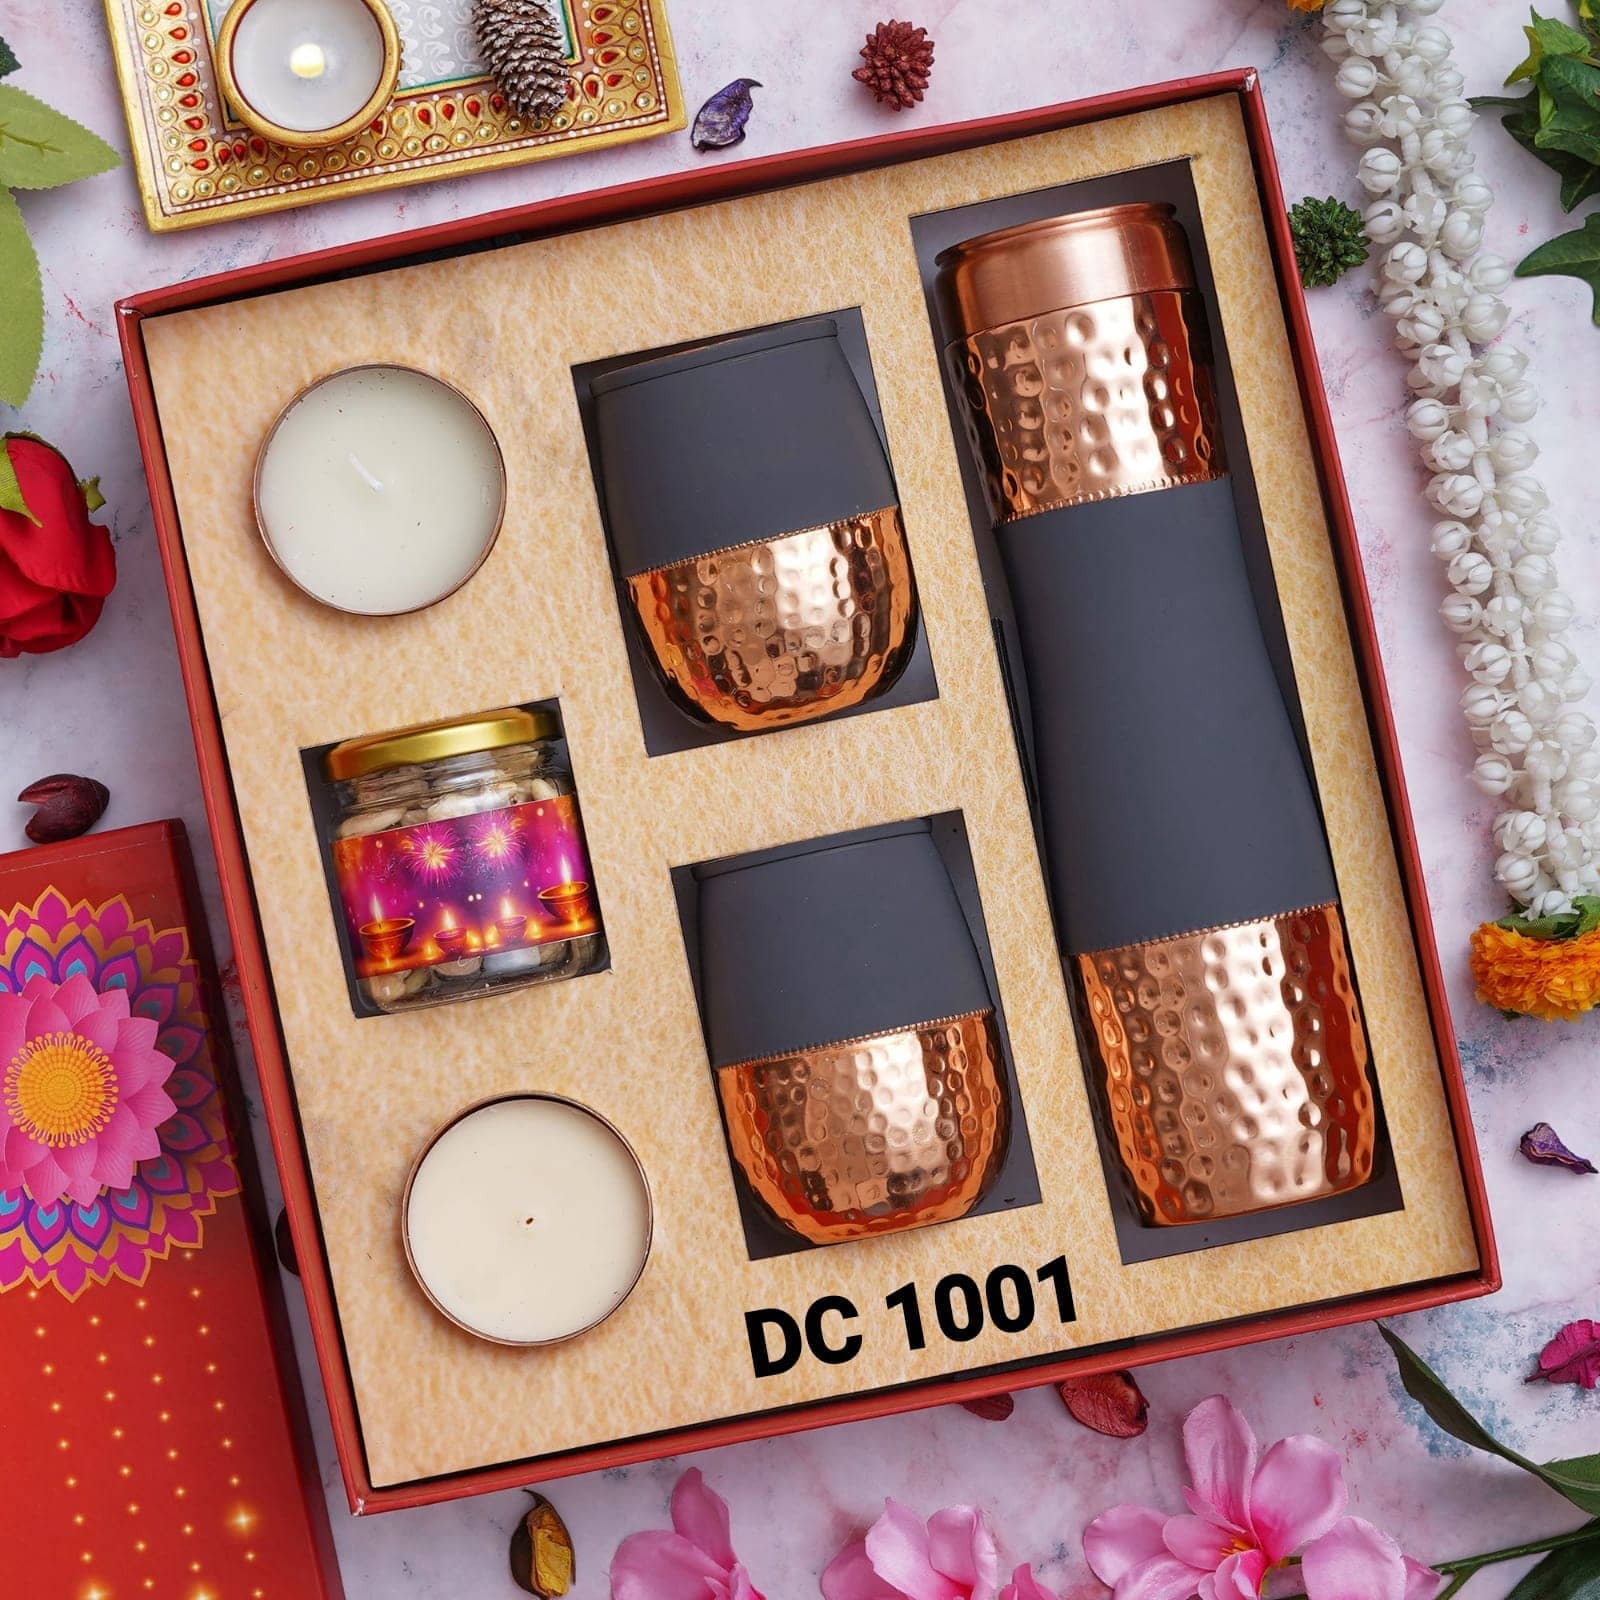 Corporate Diwali Gifts For Employees Under 500 At Rs, 45% OFF